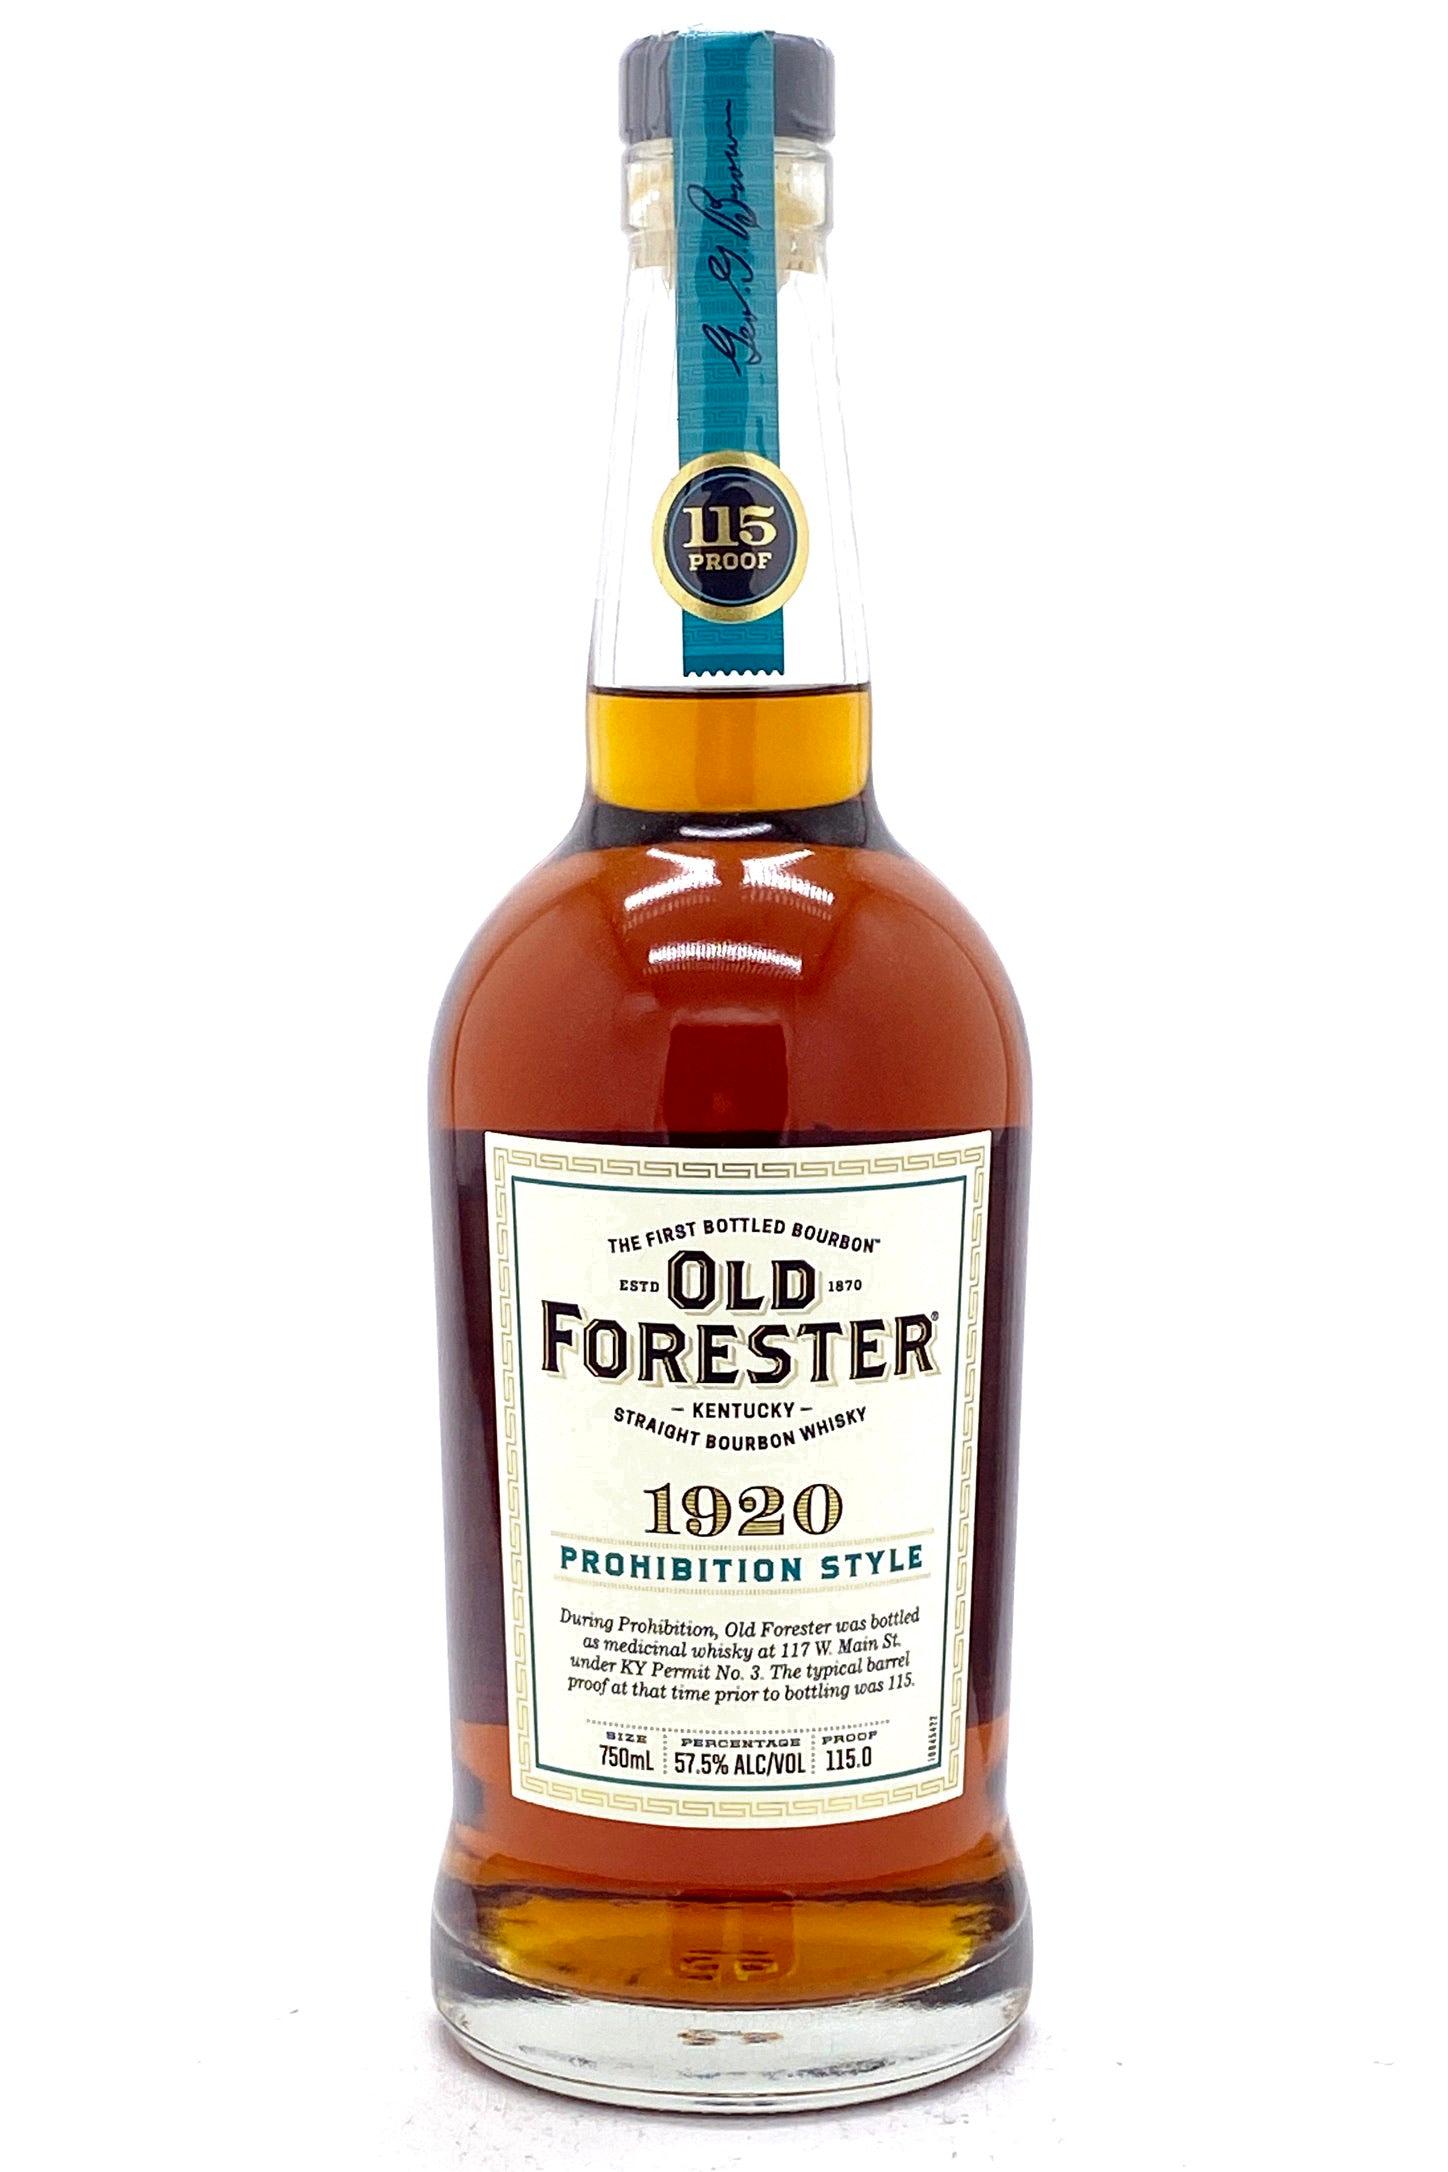 old forester 1920 prohibition style